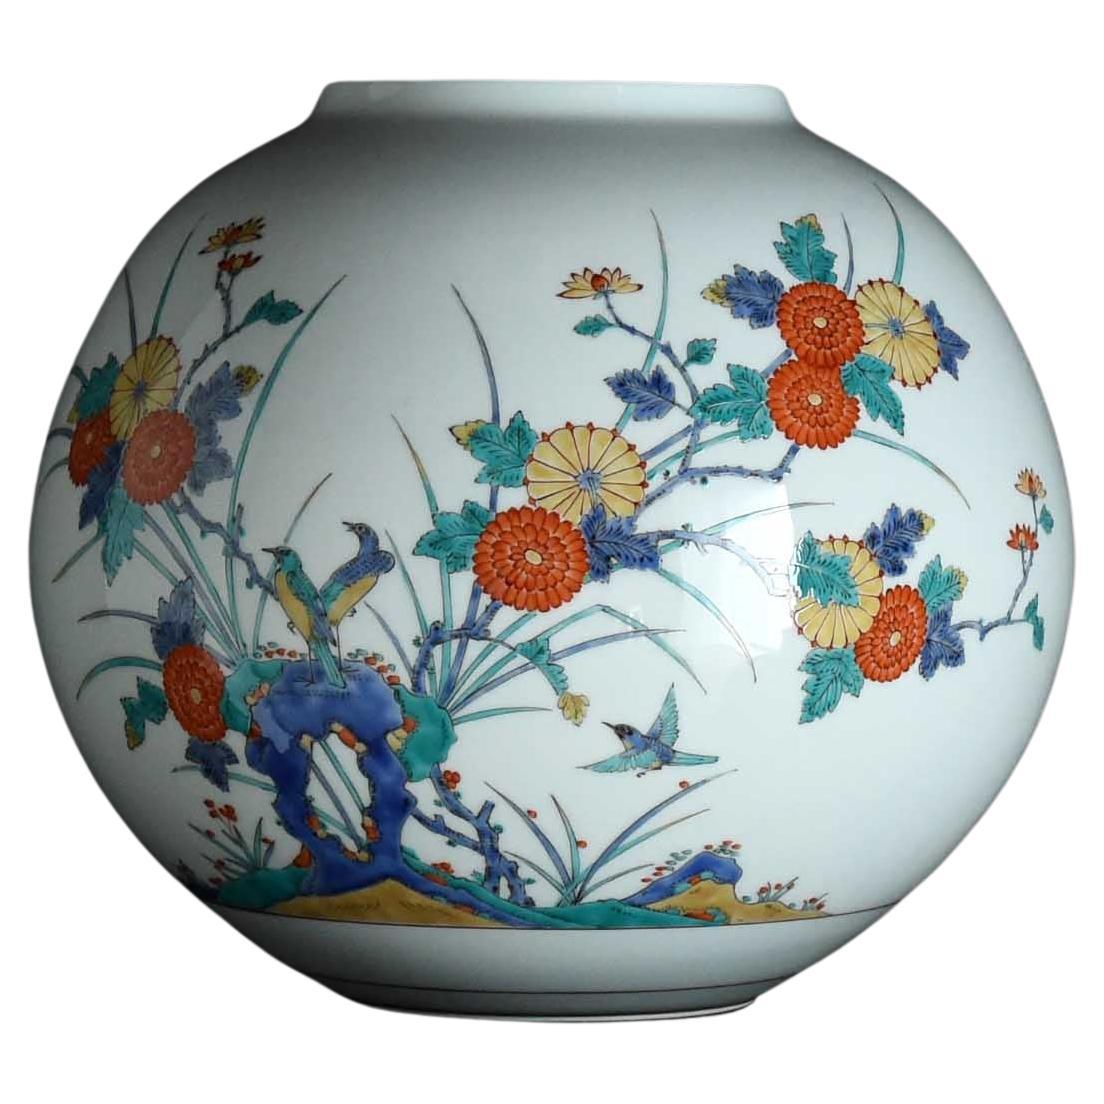 Japanned Serveware, Ceramics, Silver and Glass